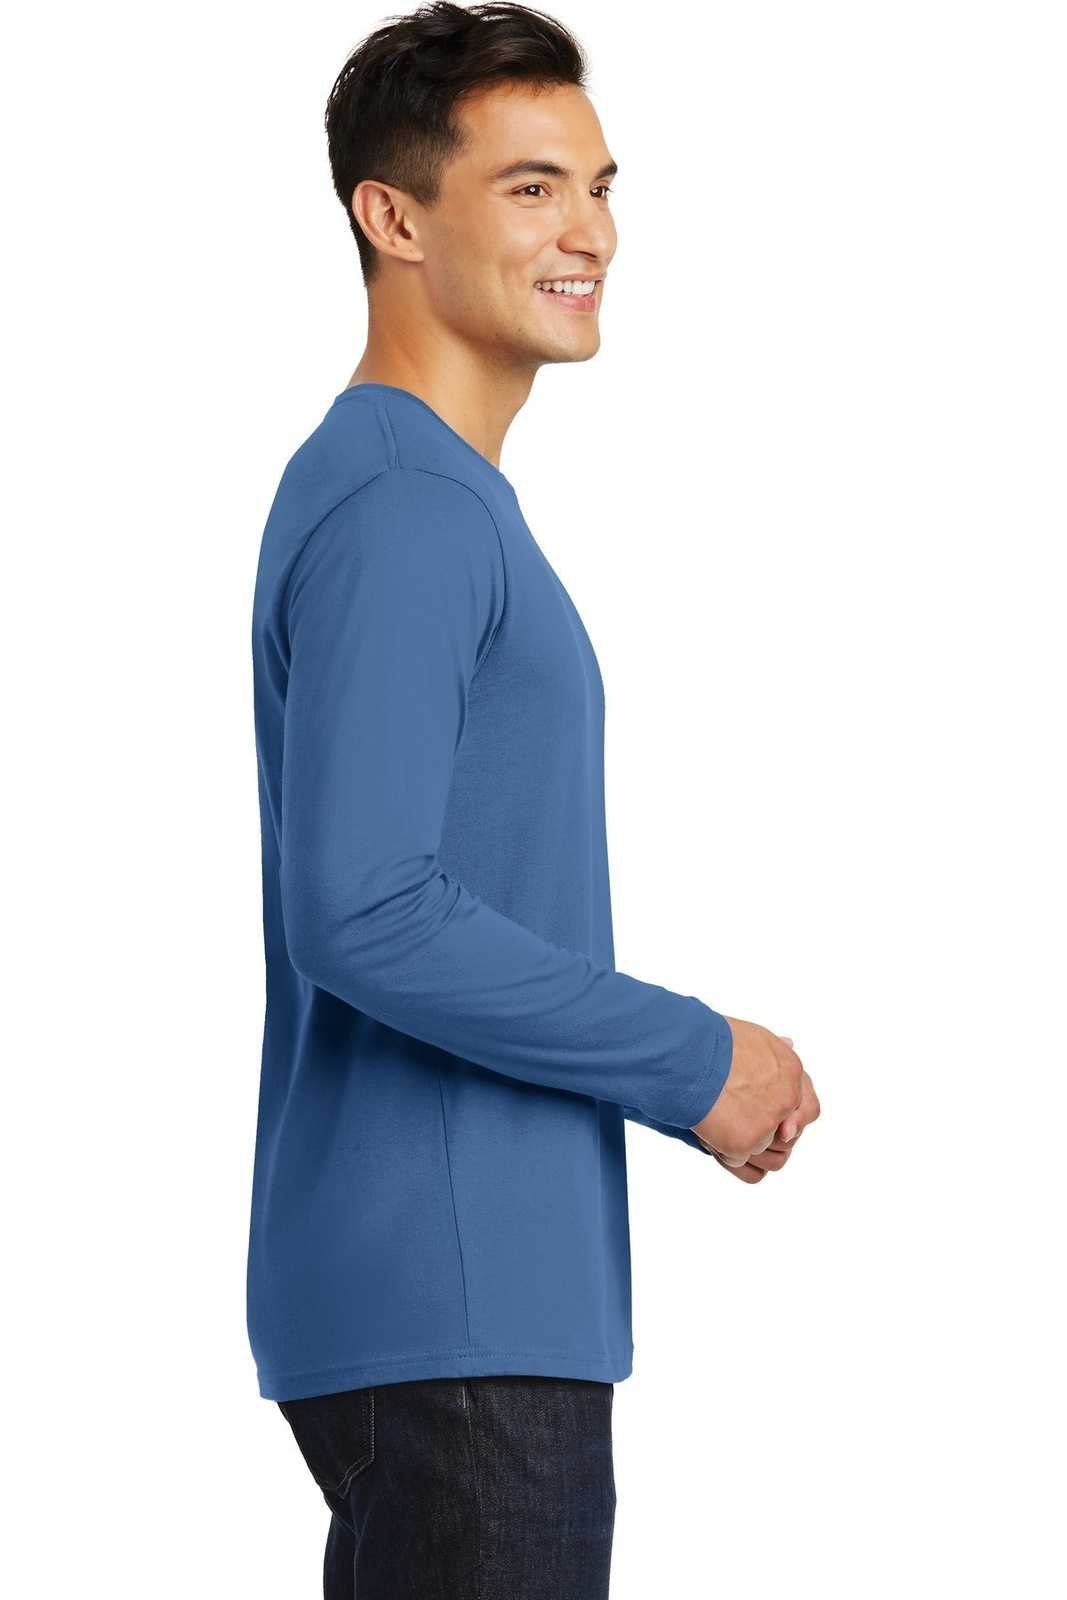 District DT105 Perfect Weight Long Sleeve Tee - Maritime Blue - HIT a Double - 3